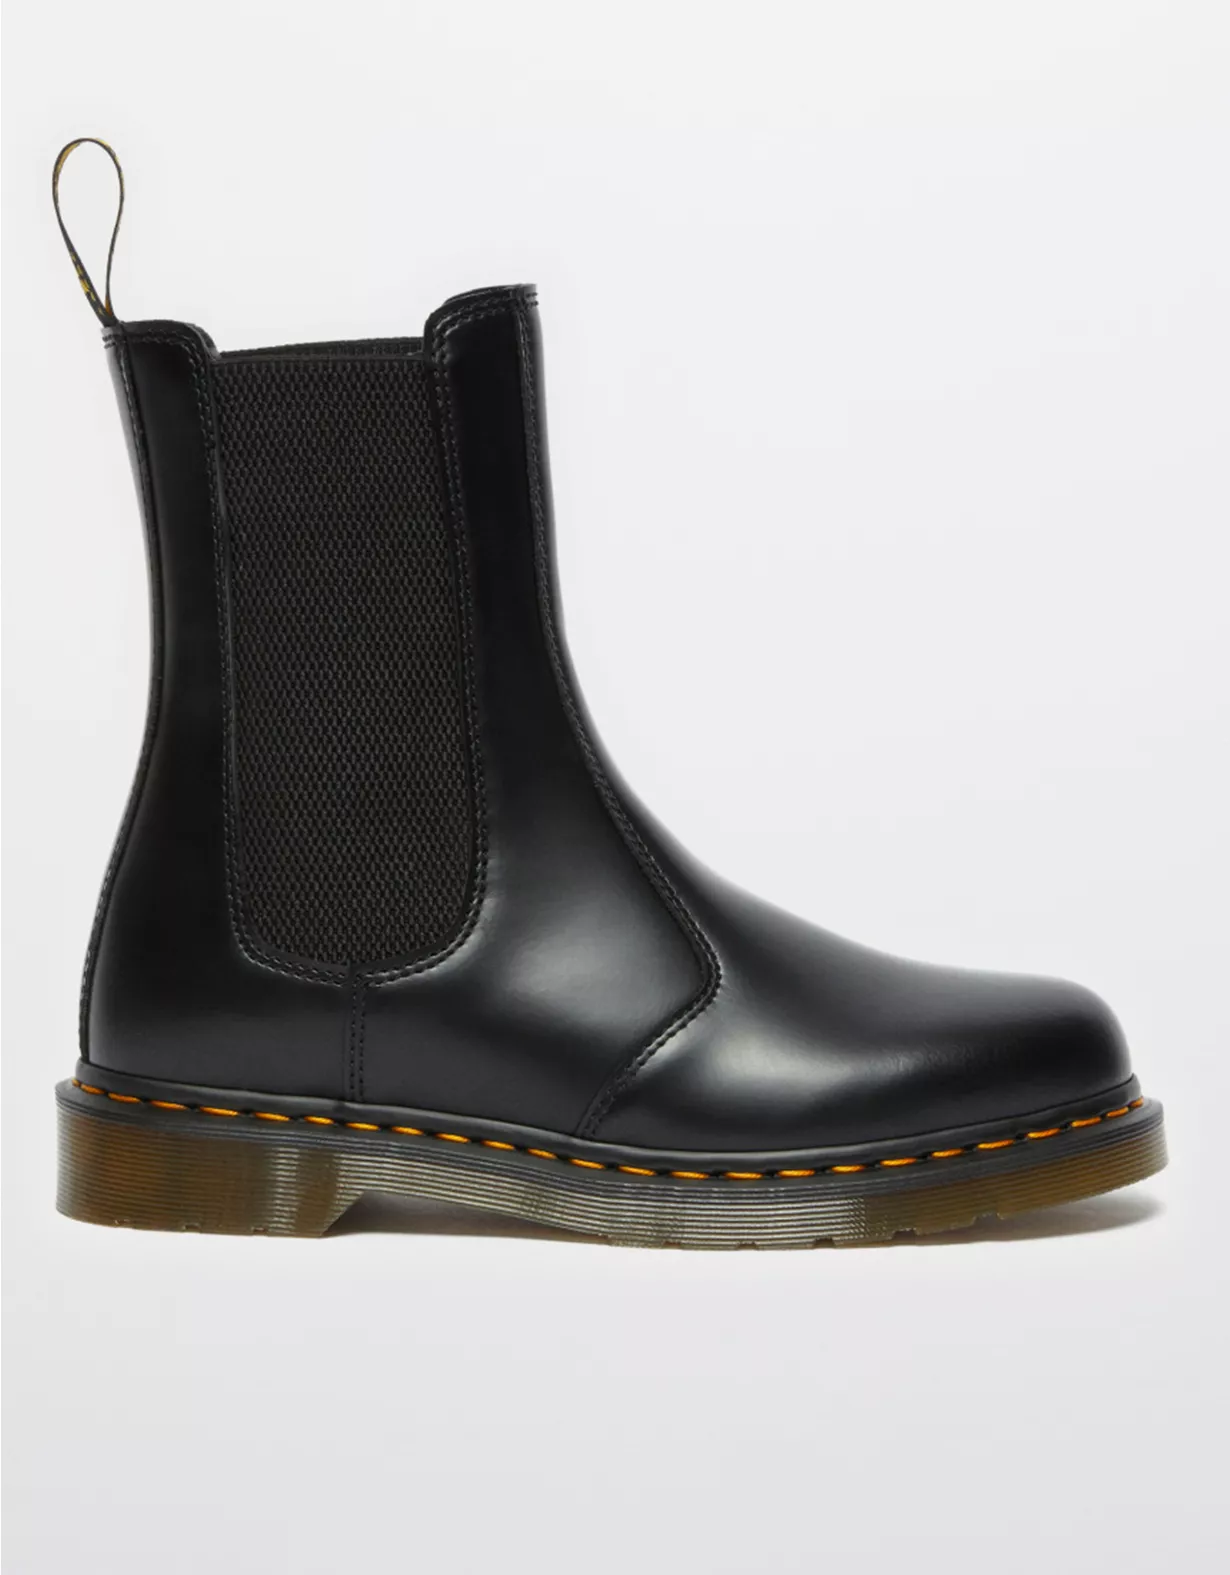 Dr. Martens Women's 2976 Hi Smooth Leather Chelsea Boot